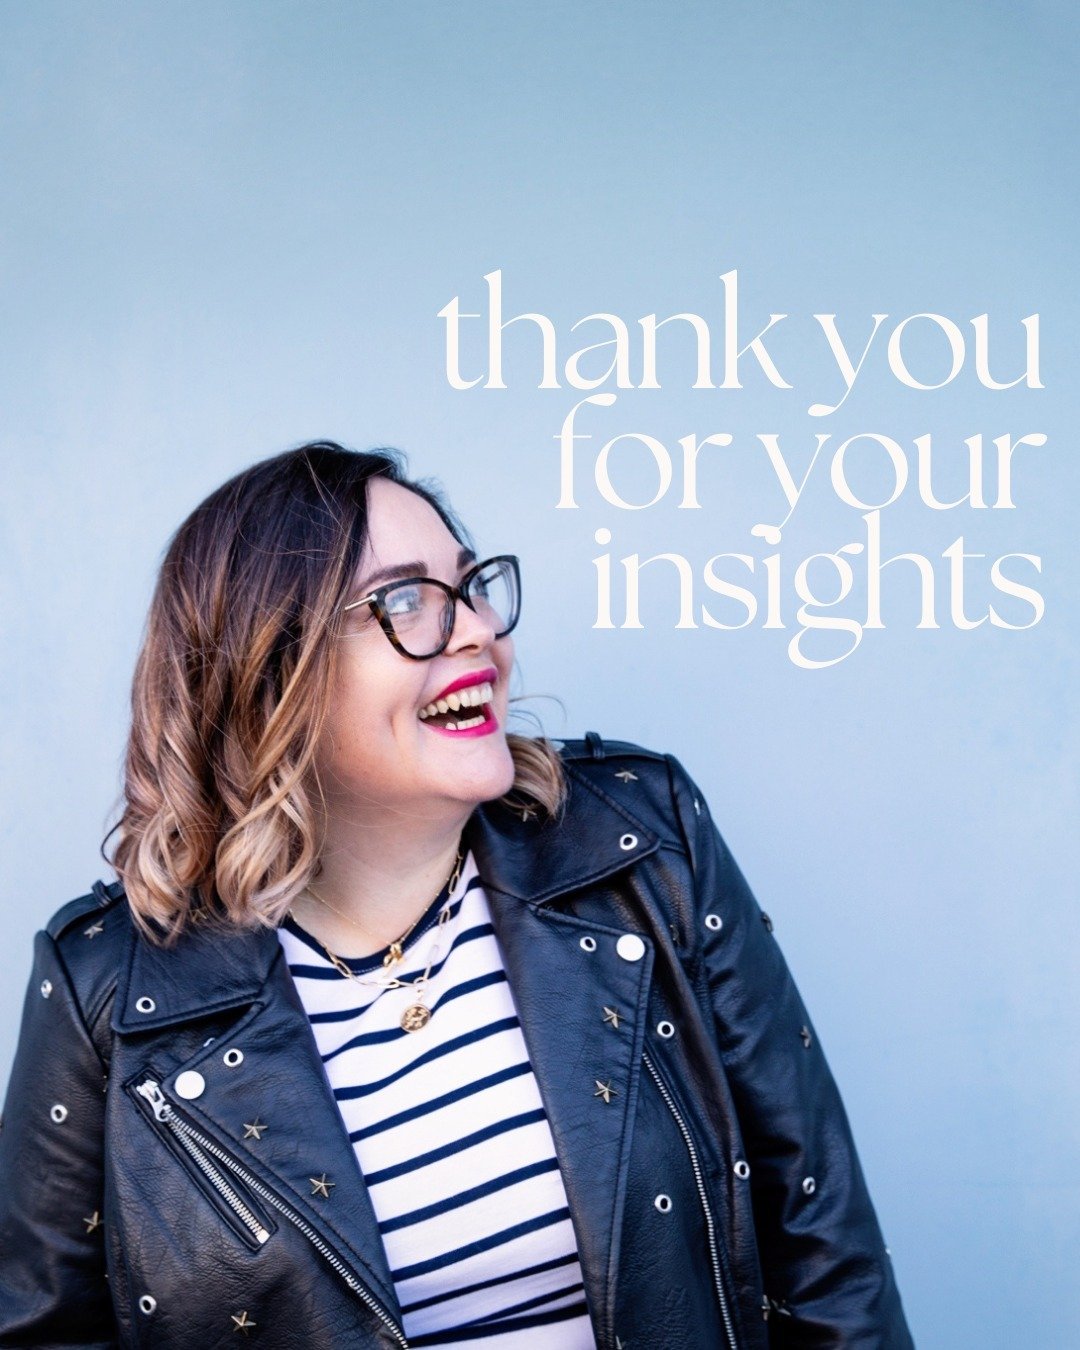 Hey loves! 

Hope you're having a great week! 

Just a quick one to say a HUGE THANKS to everyone who kindly completed my Small &amp; Mighty survey and shared their thoughts. 

The insights you have provided have made for really interesting reading a